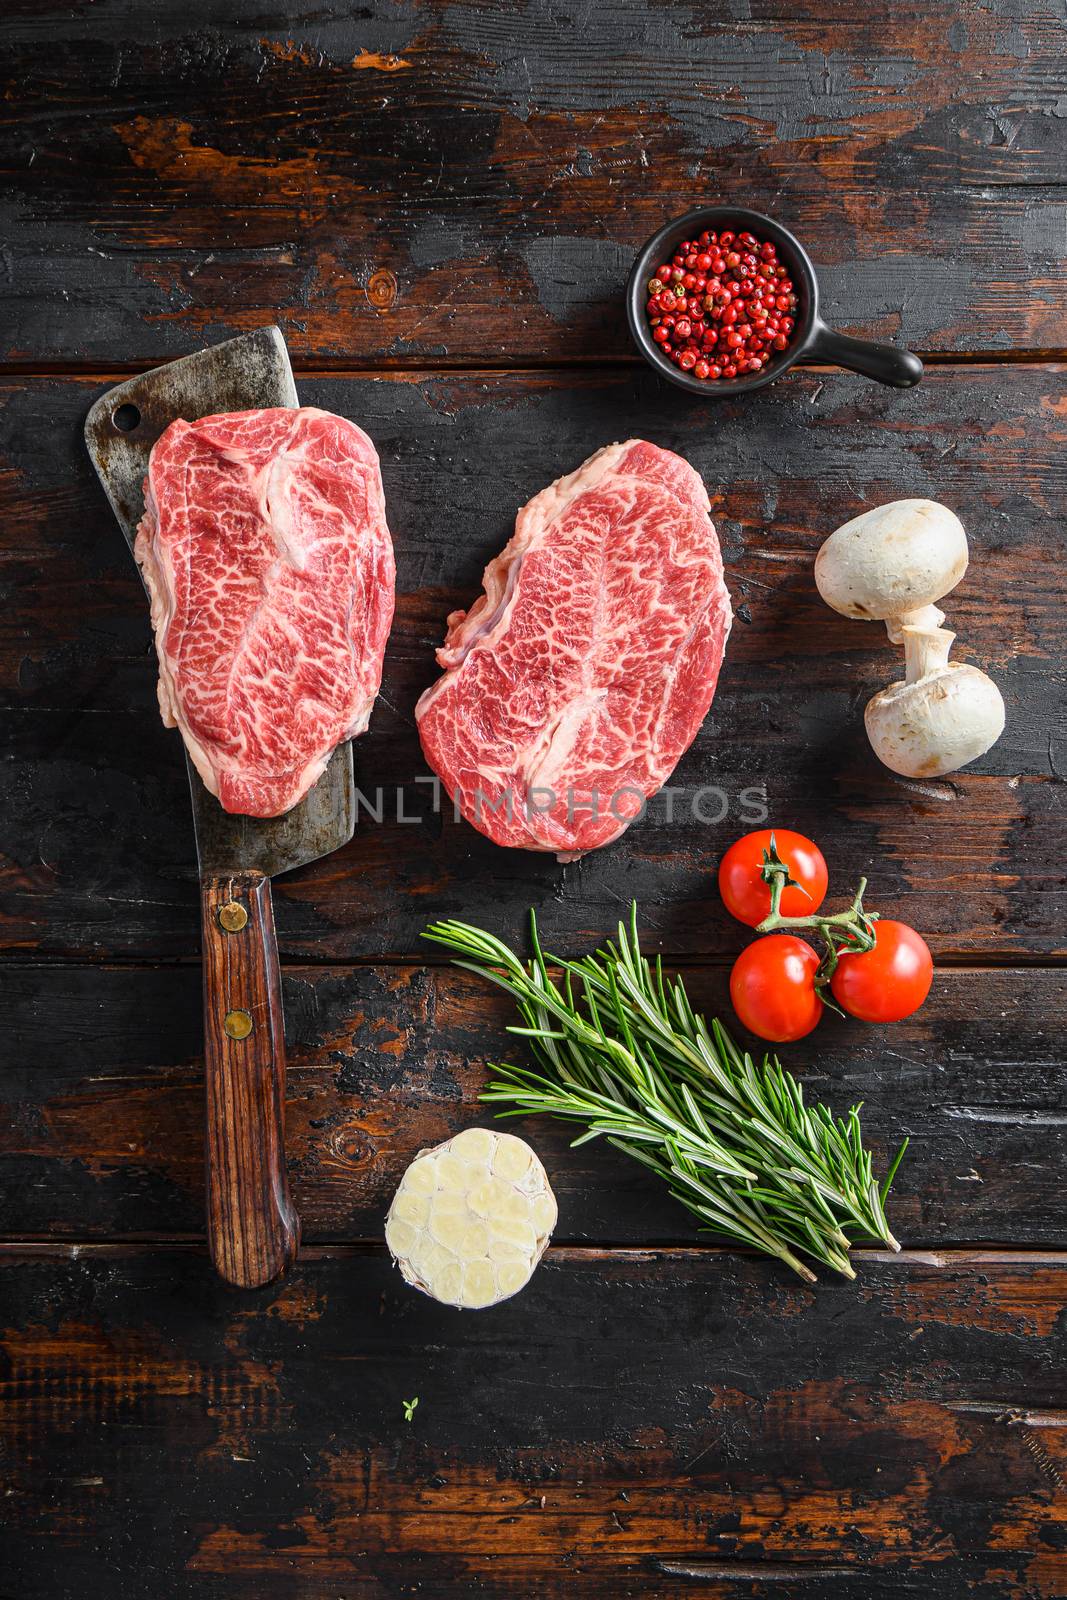 Organic Top blade steak, raw meat, marbled beef butler cut on metal butcher cleaver knife with rosemary and farm herbs over old wood table background top view by Ilianesolenyi